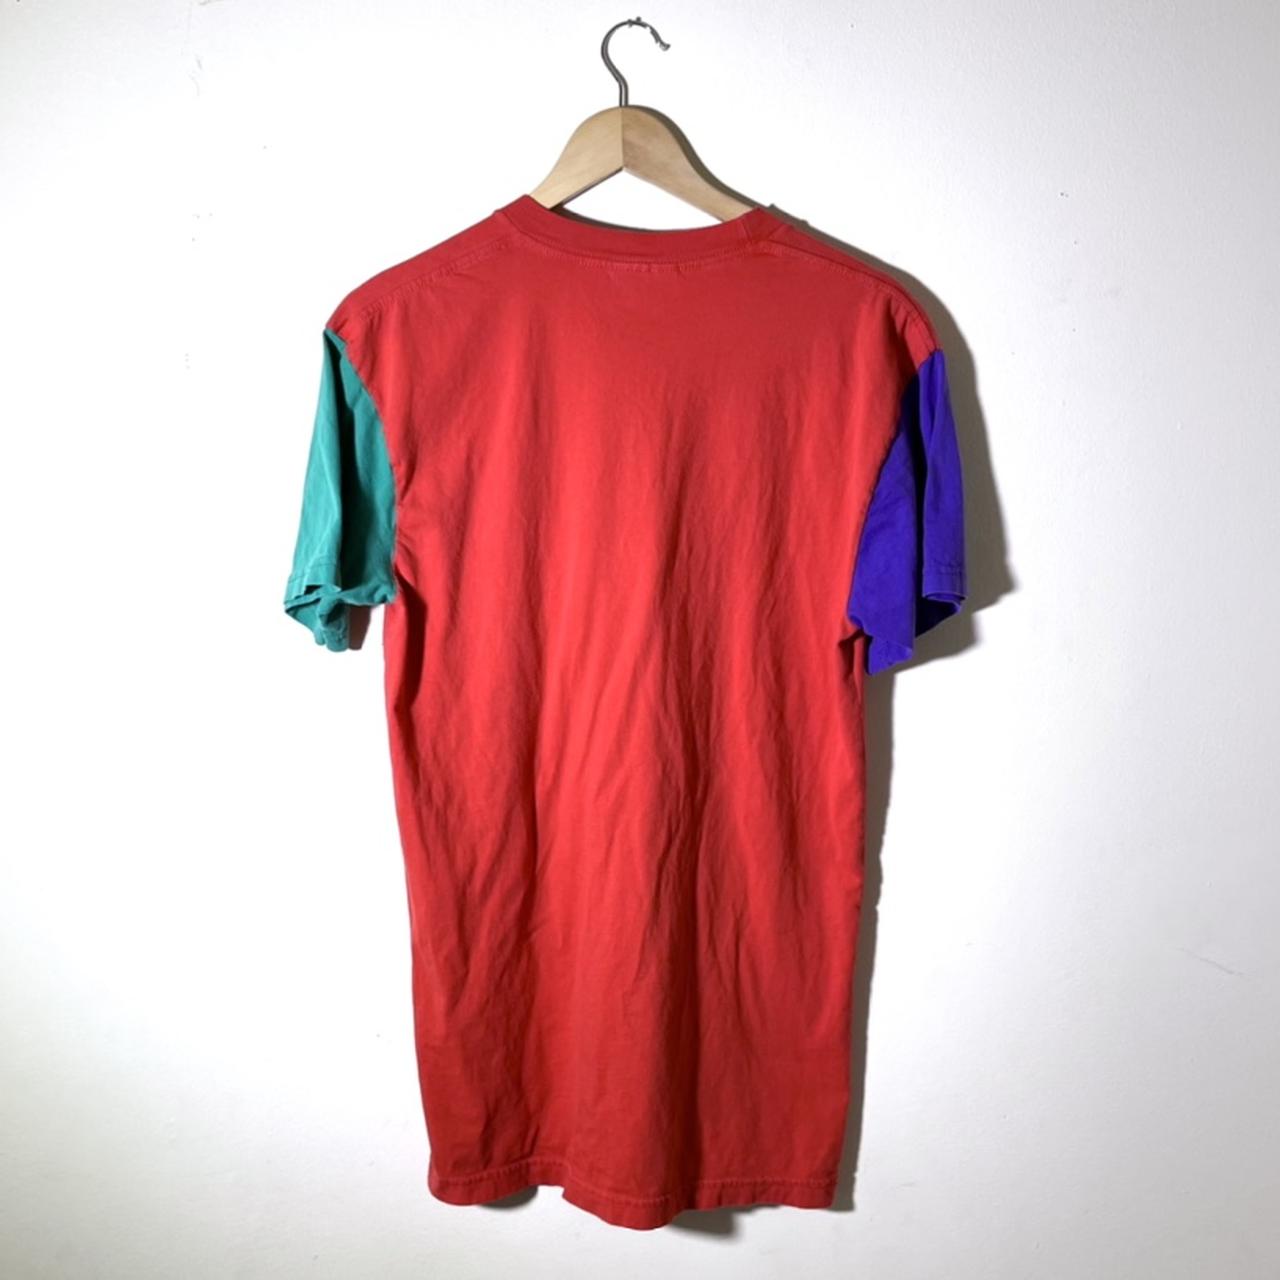 American Apparel Men's Red and Purple T-shirt (4)